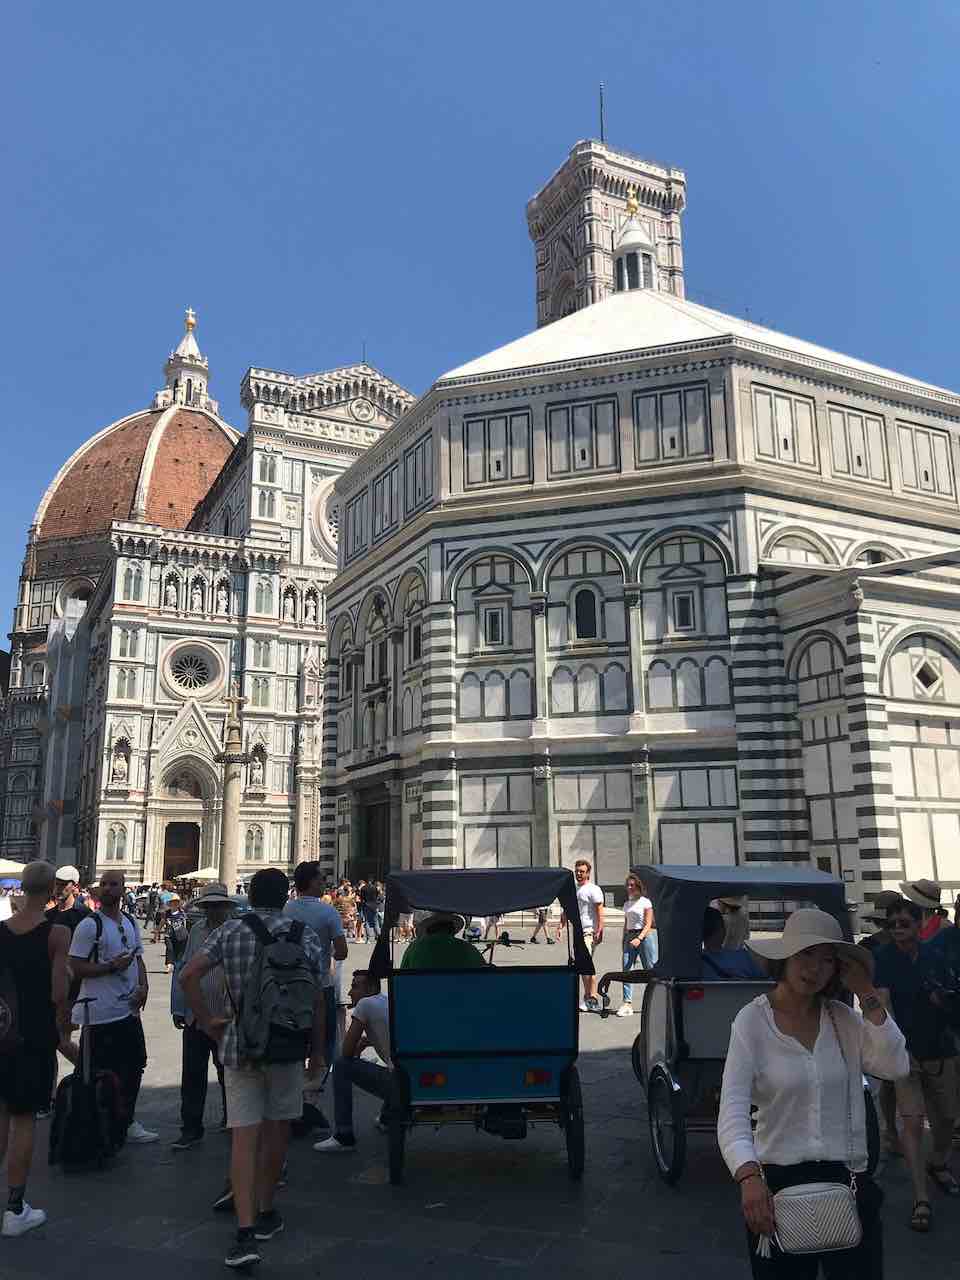 Duomo from street full of people